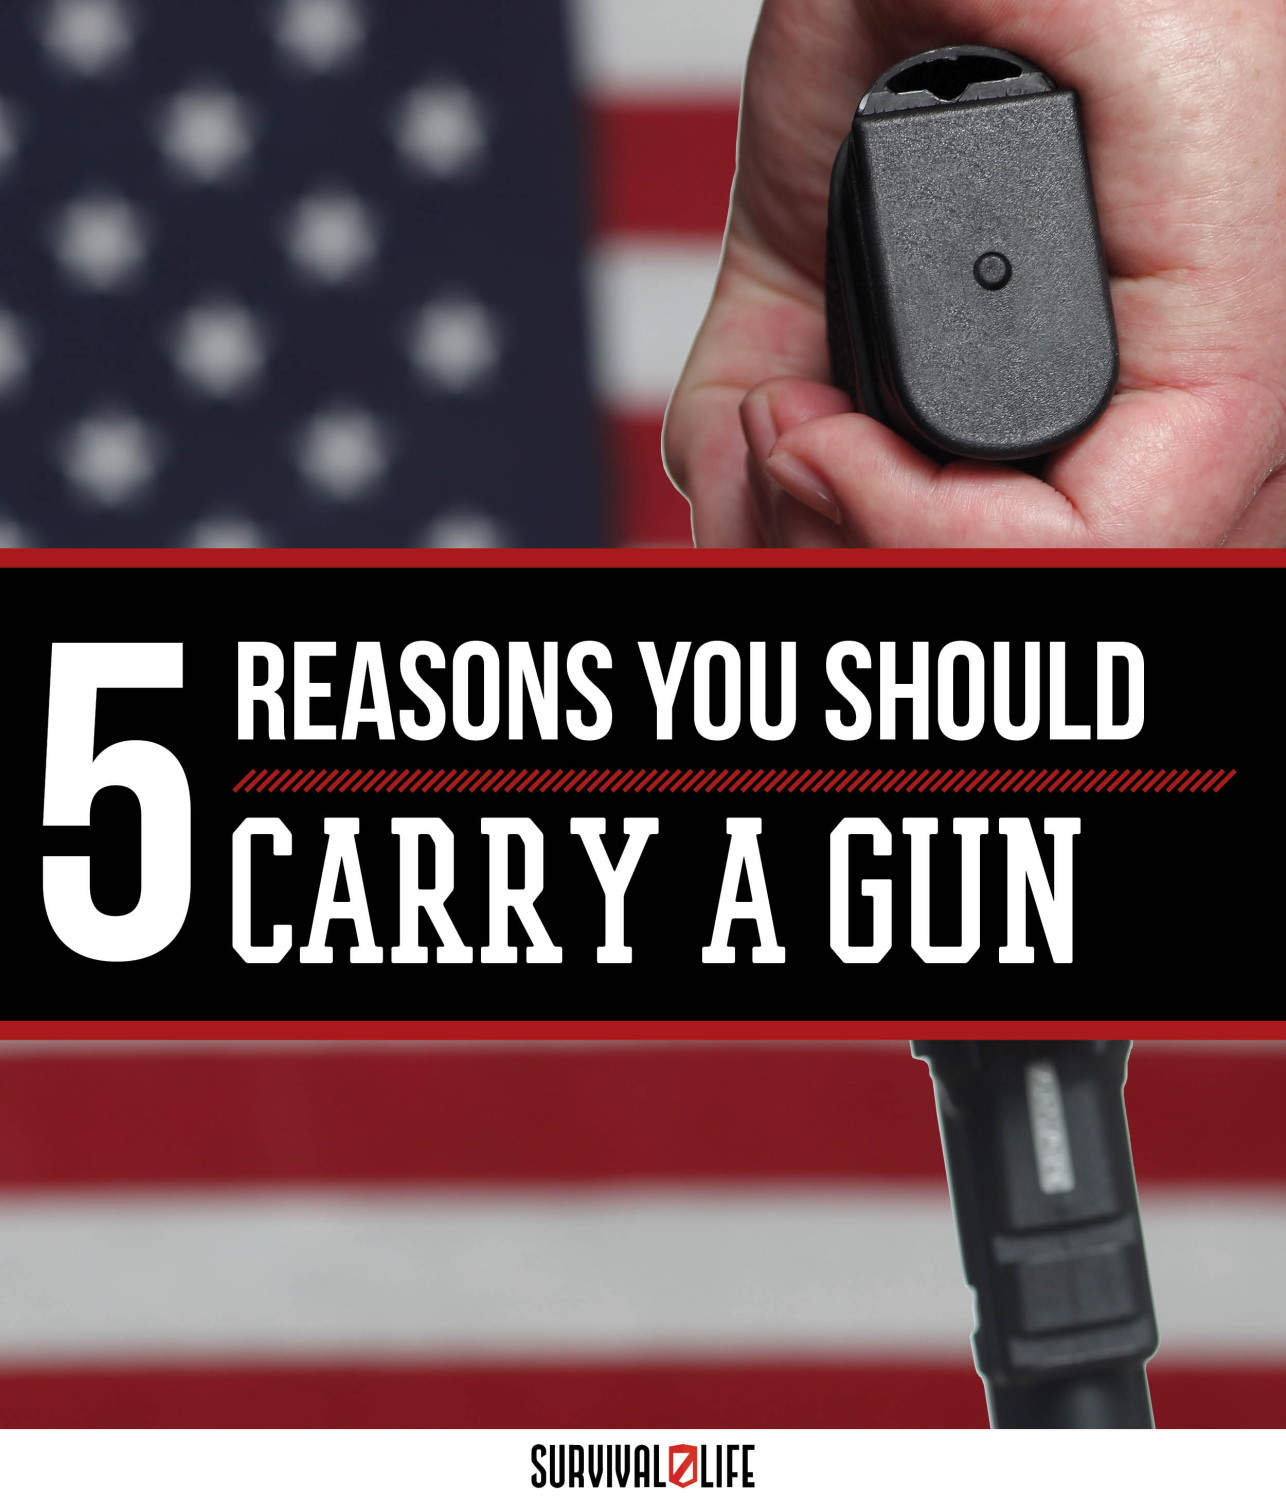 5 Reasons to Carry a Gun by Survival Life at http://survivallife.com/2015/05/29/why-carry-a-gun/